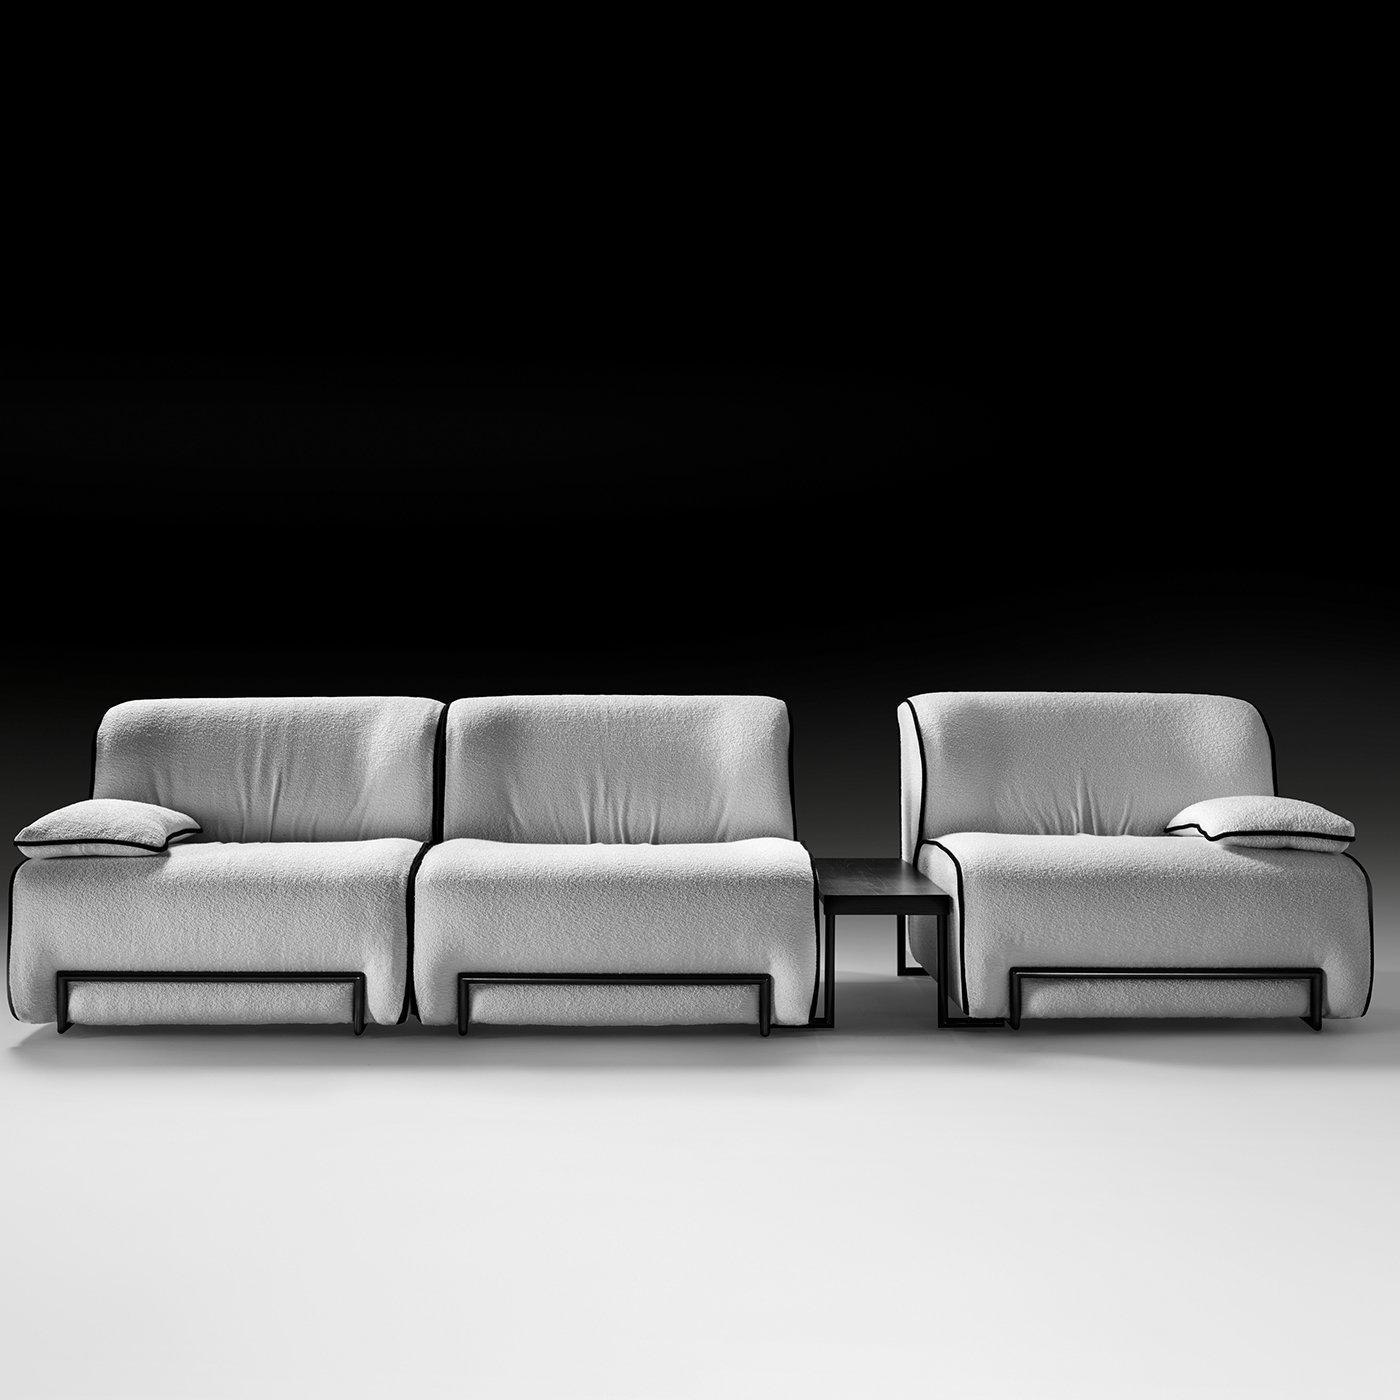 This sofa has a clean and minimal design, and features a composition with two seats on the left (each measuring 100x100 cm) connected to the single seat on the right (100x100 cm)by means of a small table (35x78 cm). The structure is made of poplar